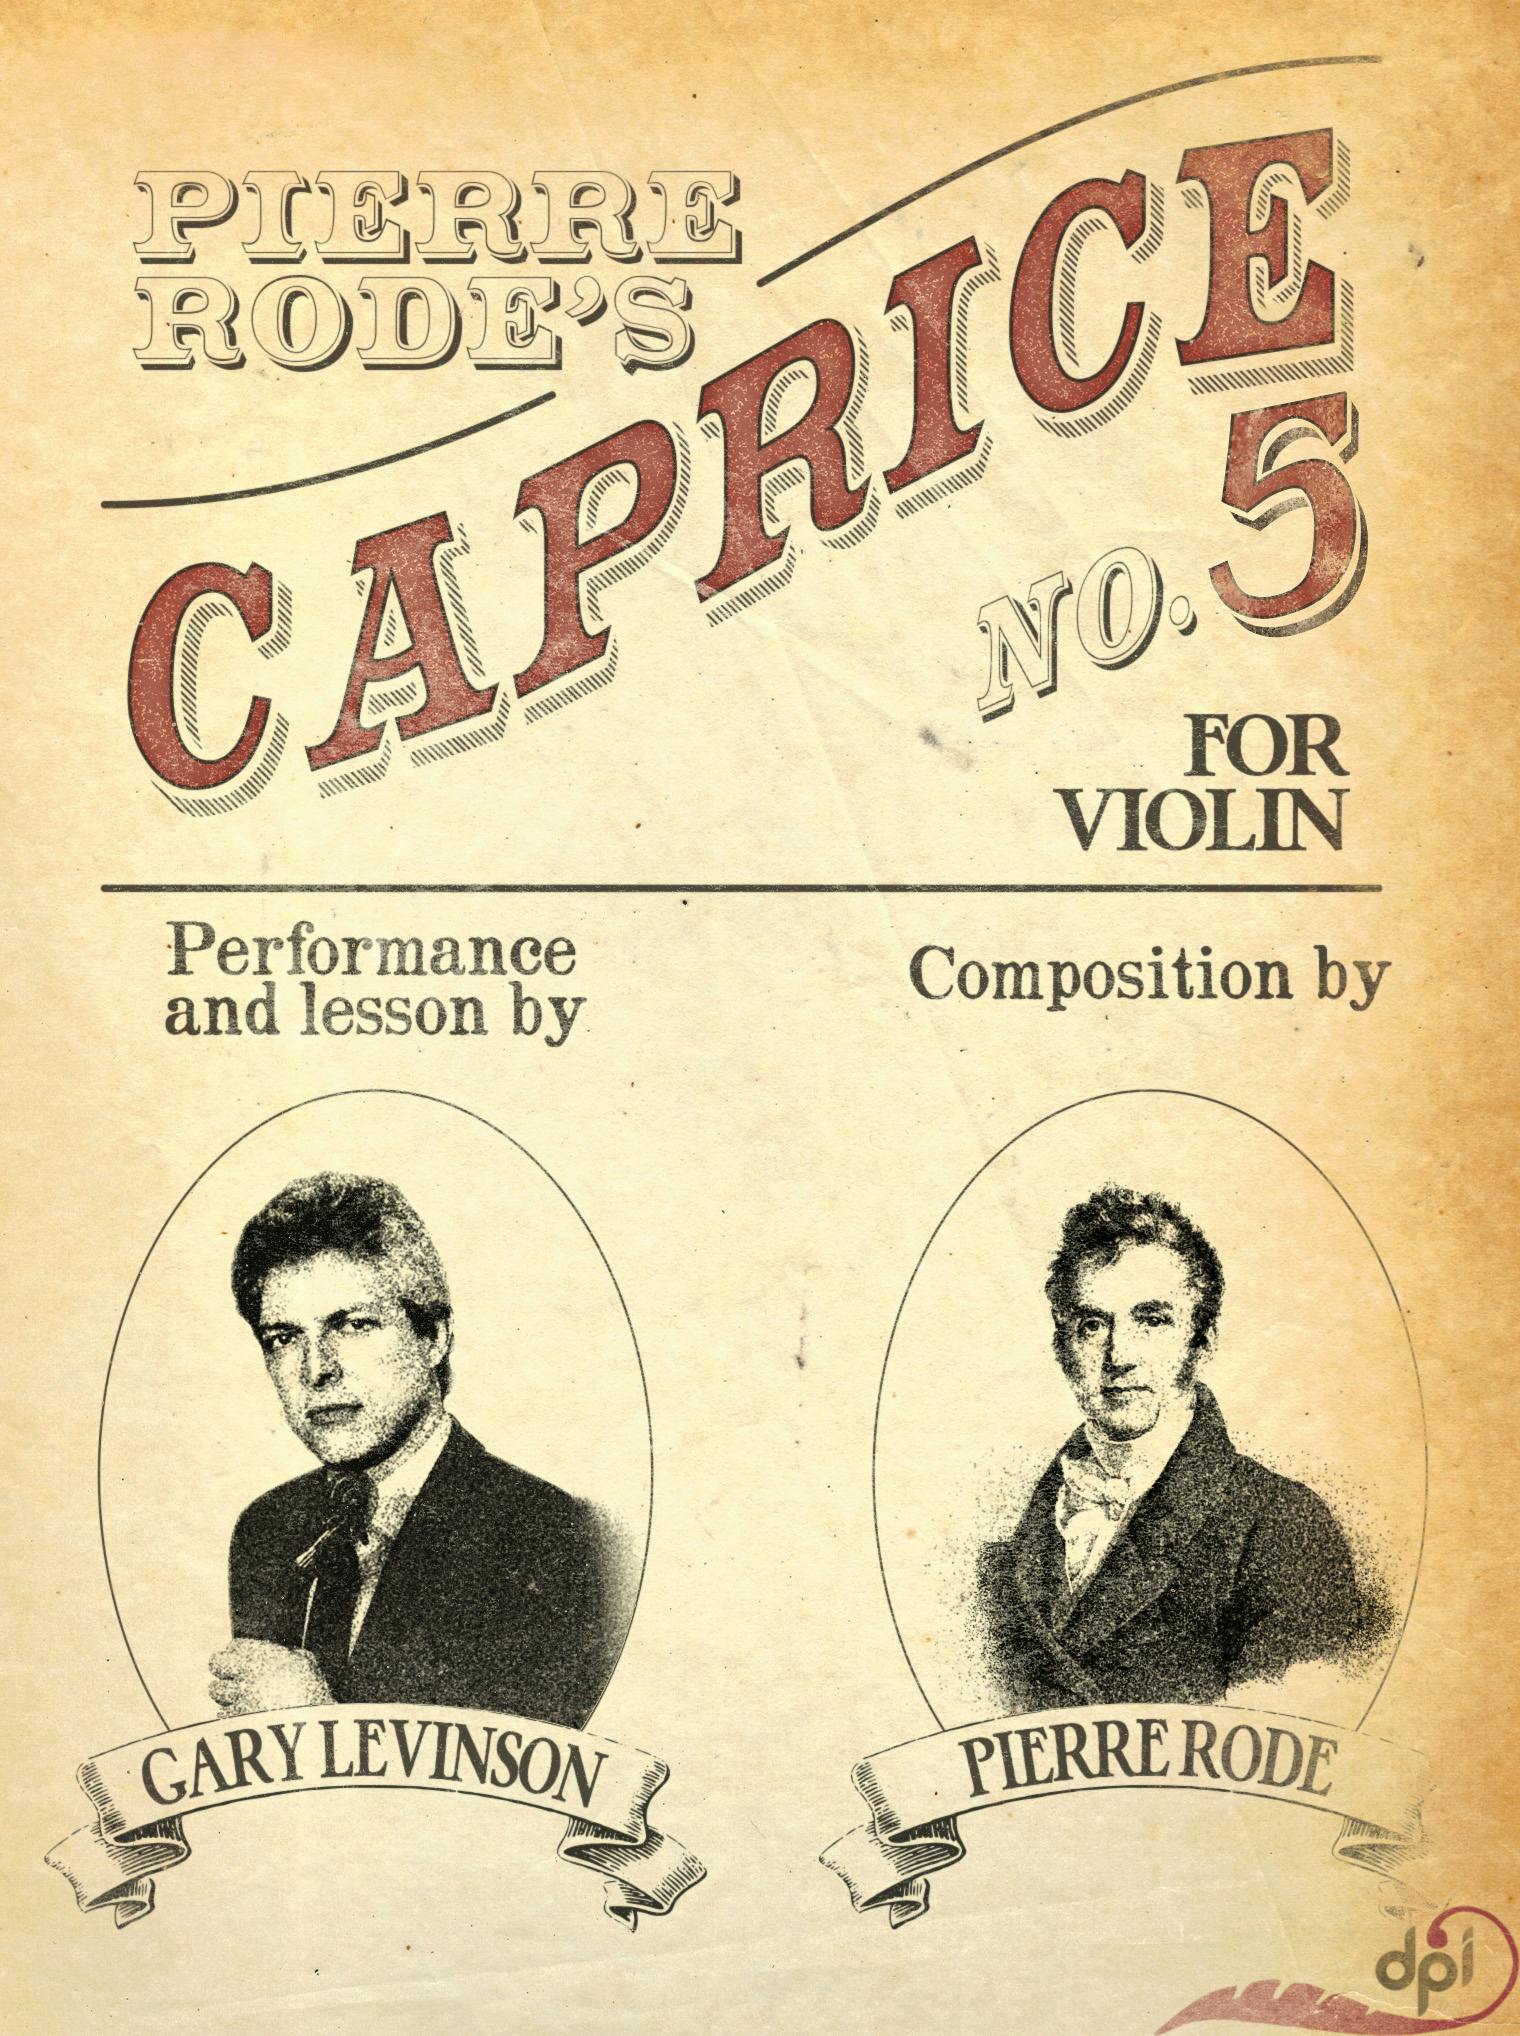 Pierre Rode's Caprice No. 5 cover